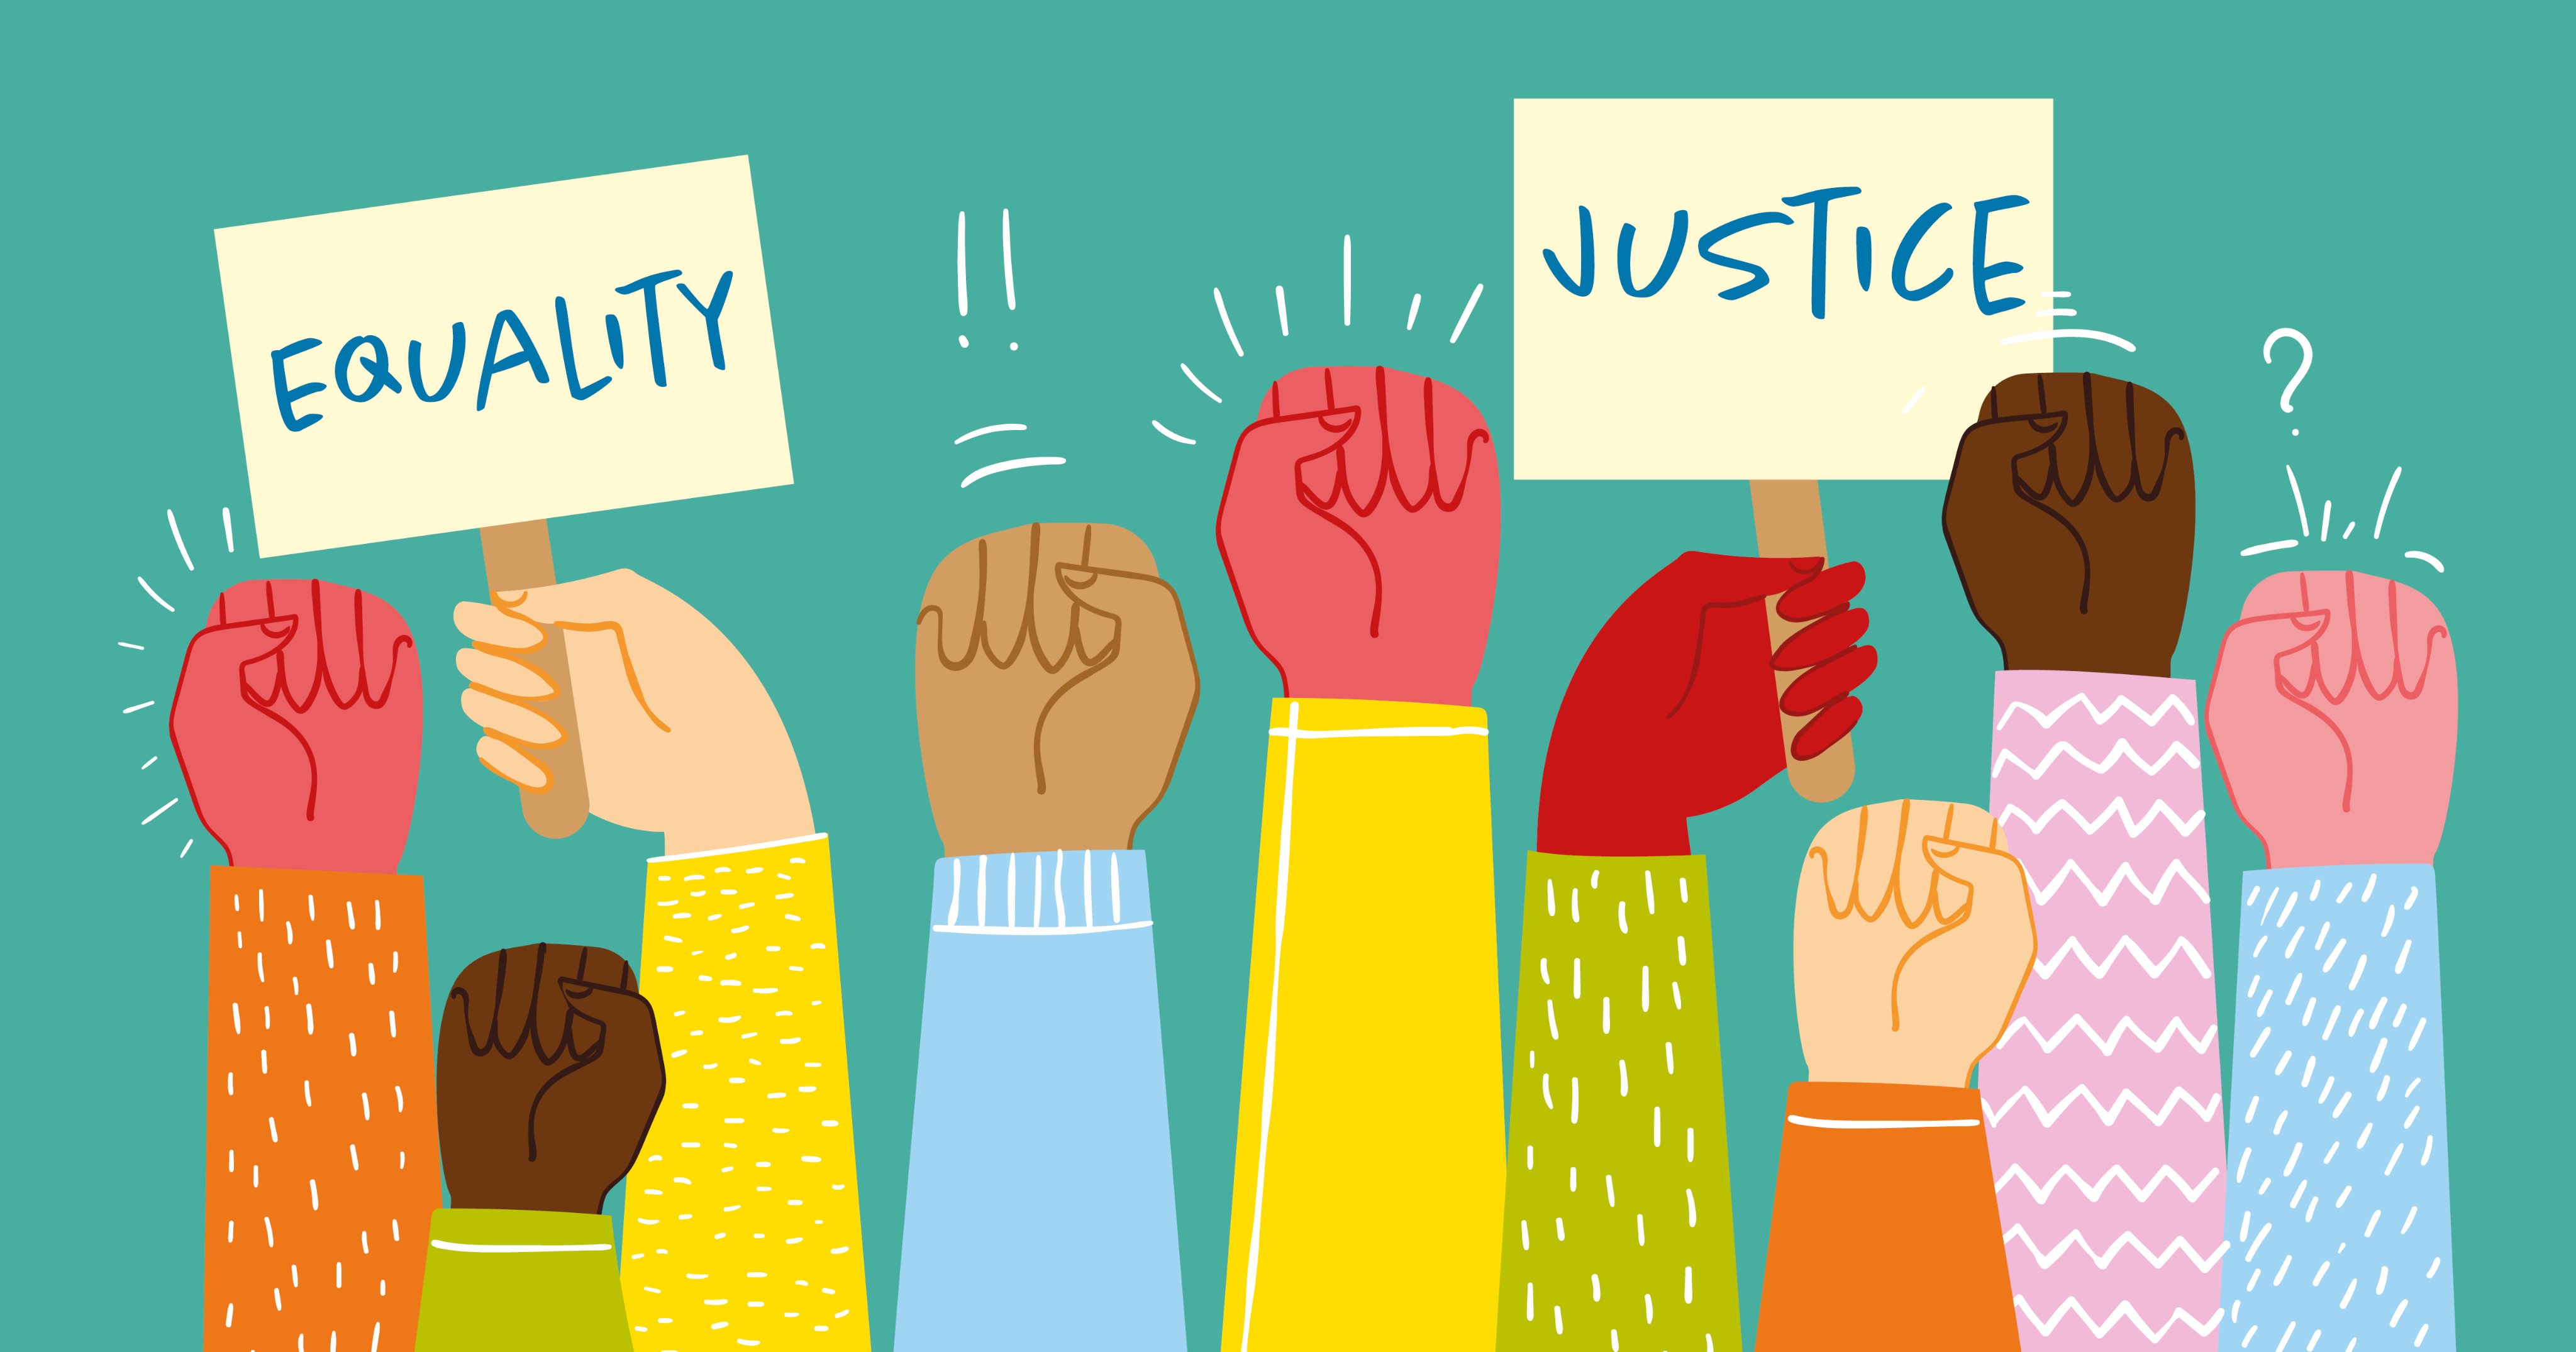 Colourful illustrated graphic, hands in air anf banners showing reading 'Equality' and 'Justice'. Teal background.